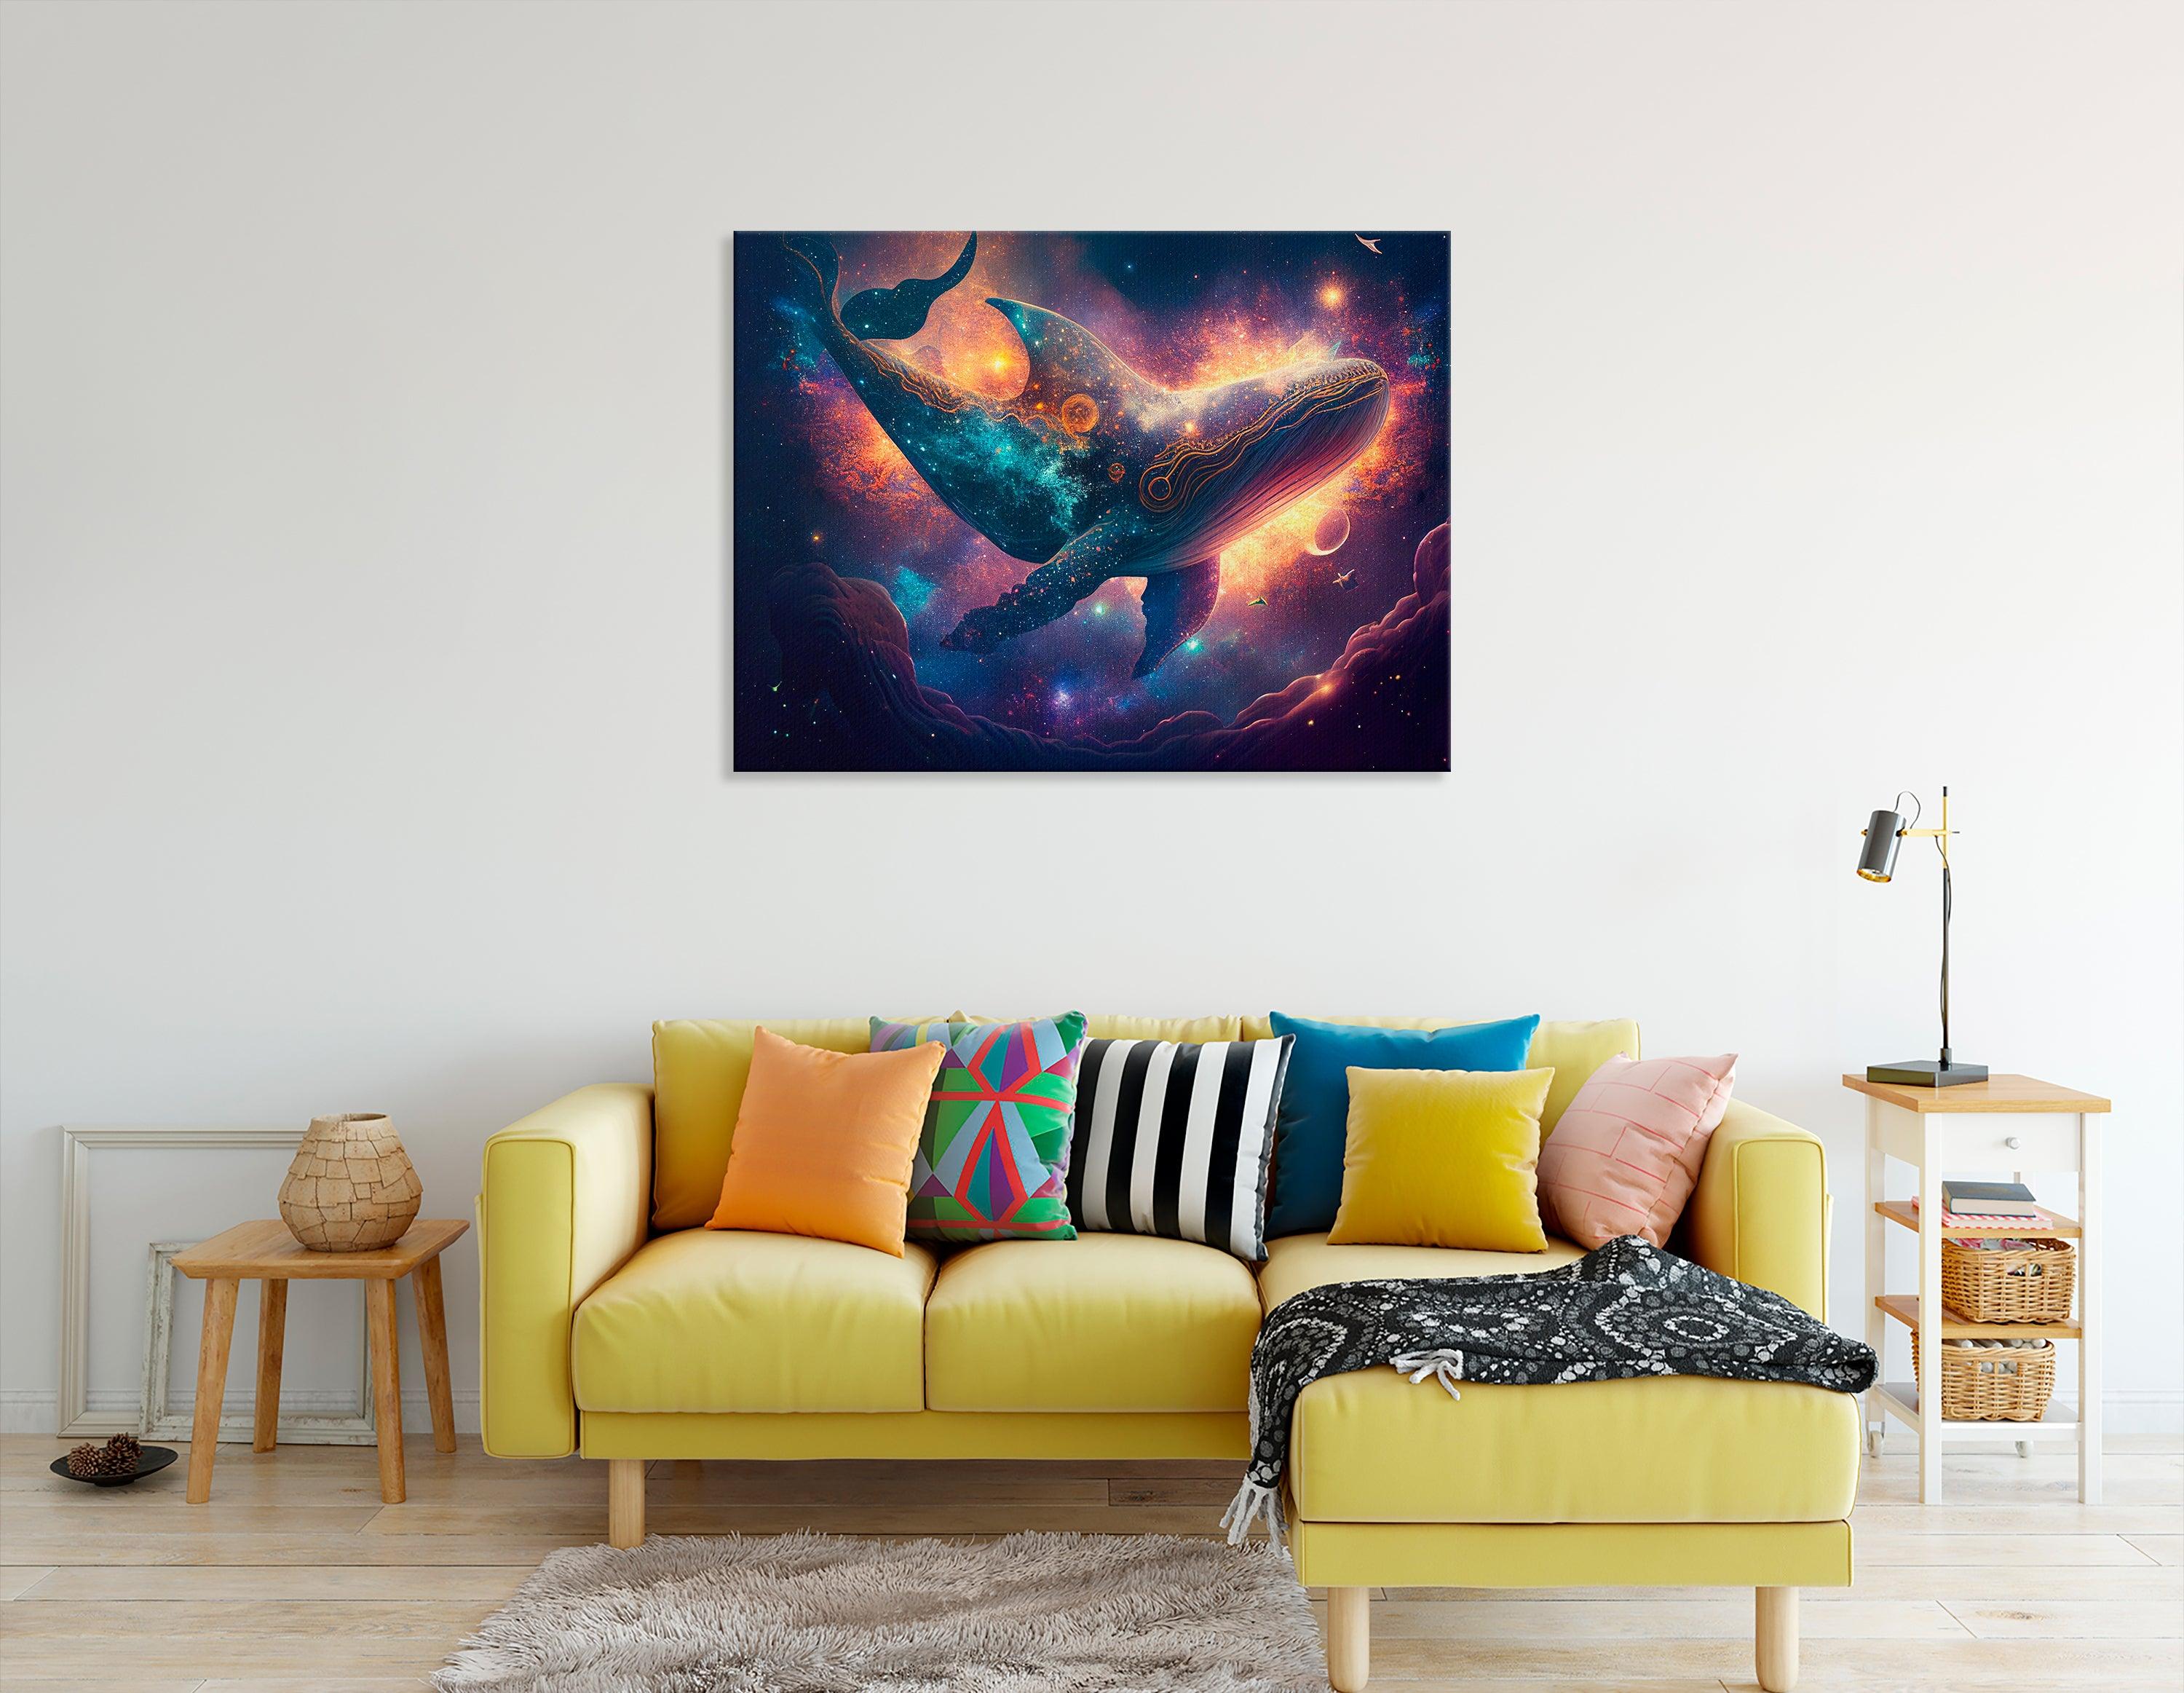 Astro Whale in the Open Space - Canvas Print - Artoholica Ready to Hang Canvas Print